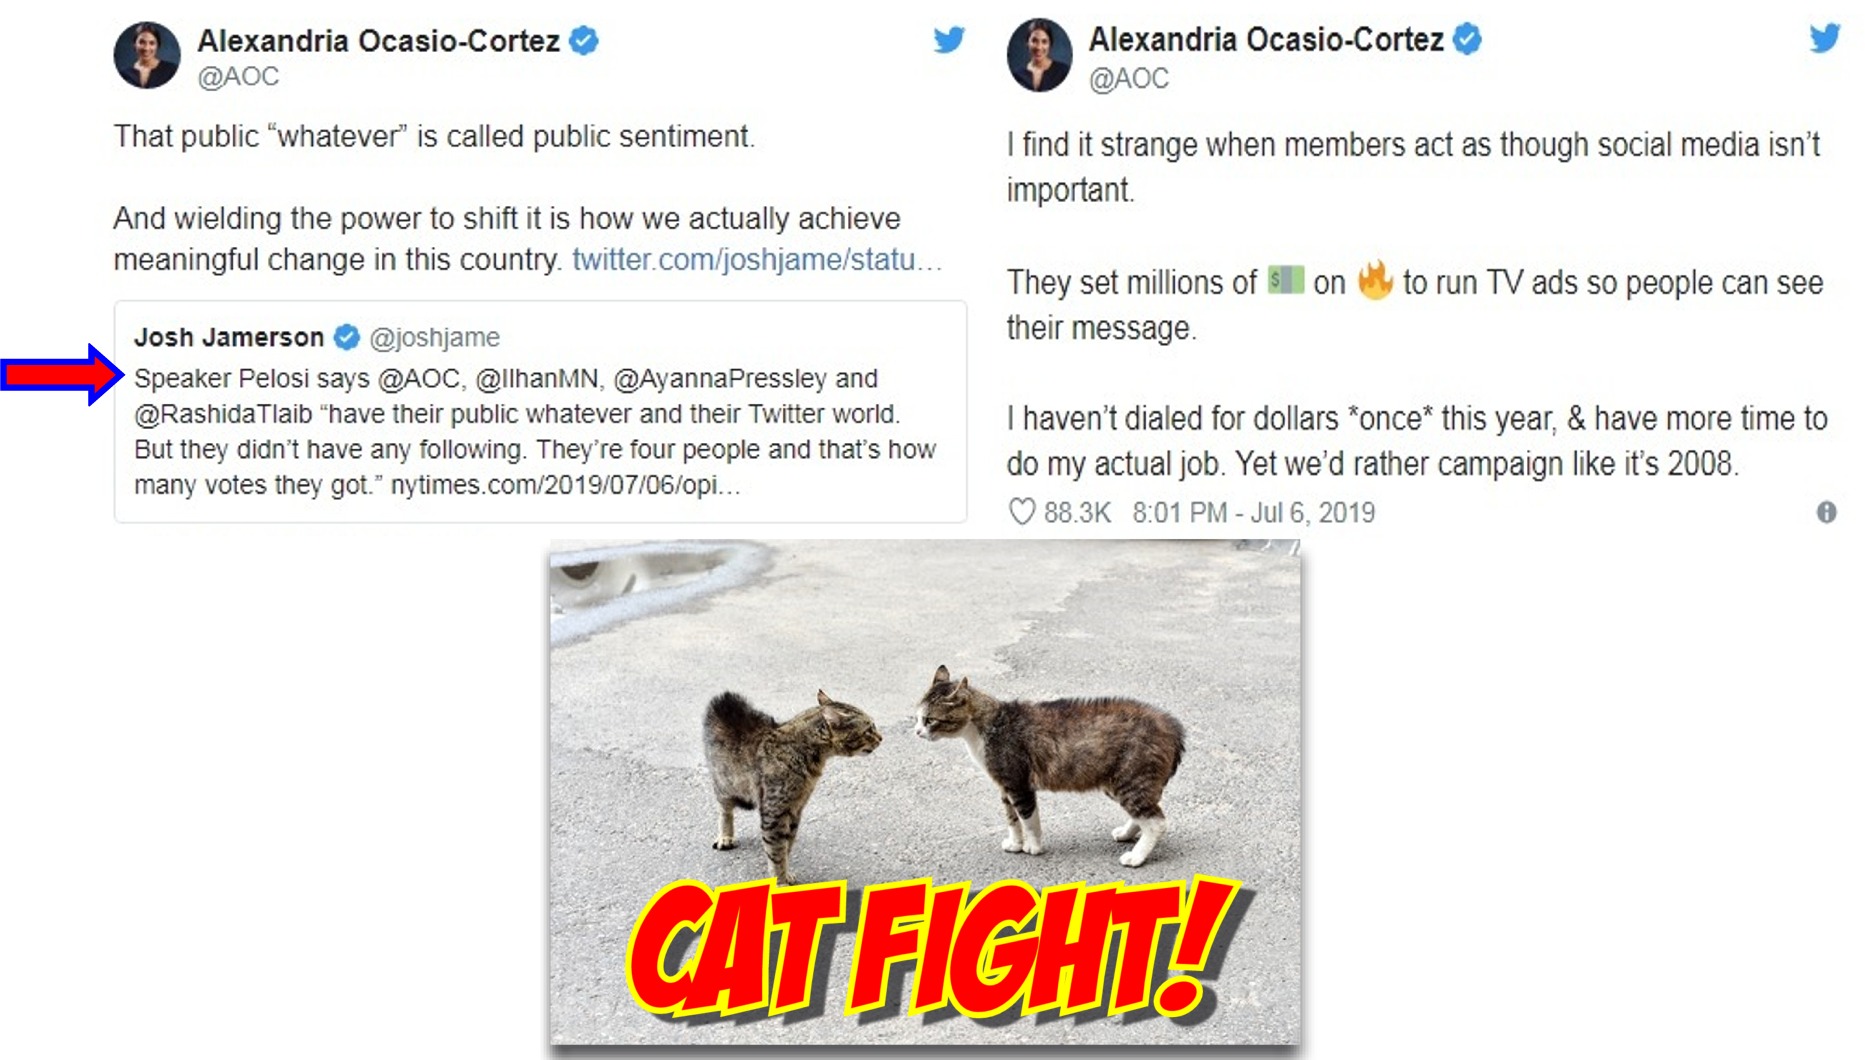 livestock - Alexandria OcasioCortez That public "whatever" is called public sentiment. Alexandria OcasioCortez I find it strange when members act as though social media isn't important. And wielding the power to shift it is how we actually achieve meaning